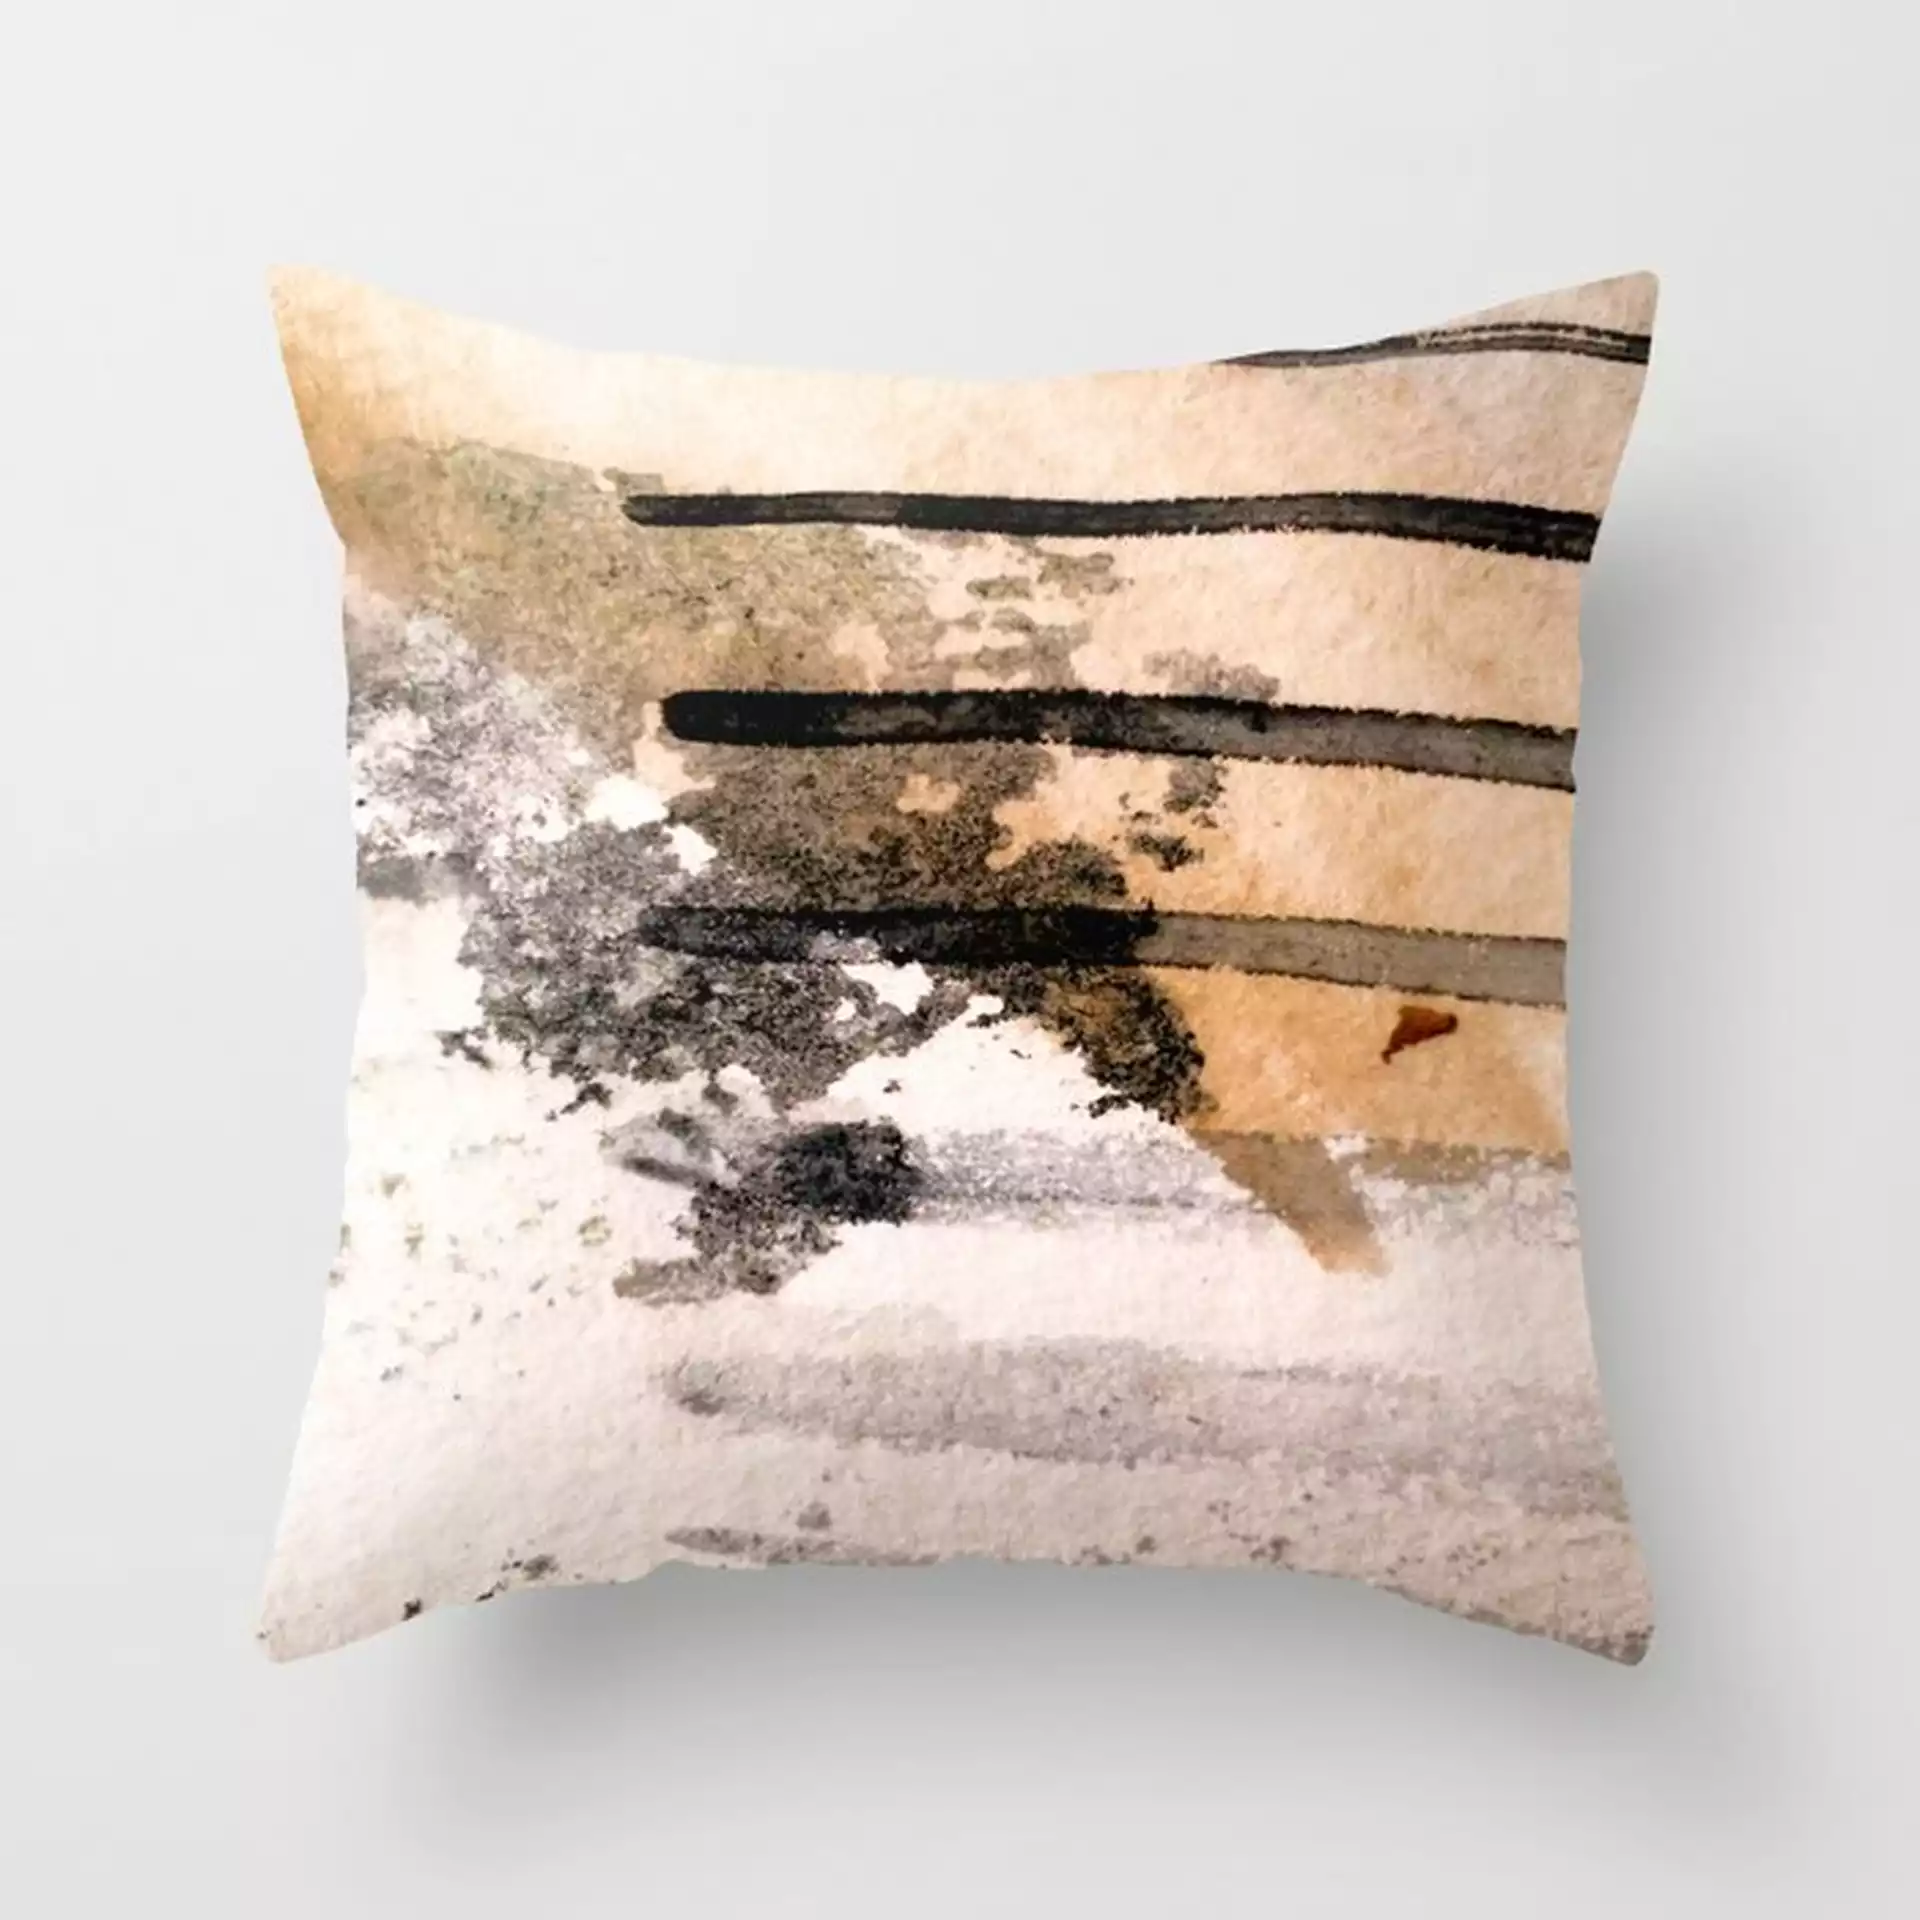 Desert Musings - A Watercolor And Ink Abstract In Gray, Brown, And Black Couch Throw Pillow by Alyssa Hamilton Art - Cover (24" x 24") with pillow insert - Indoor Pillow